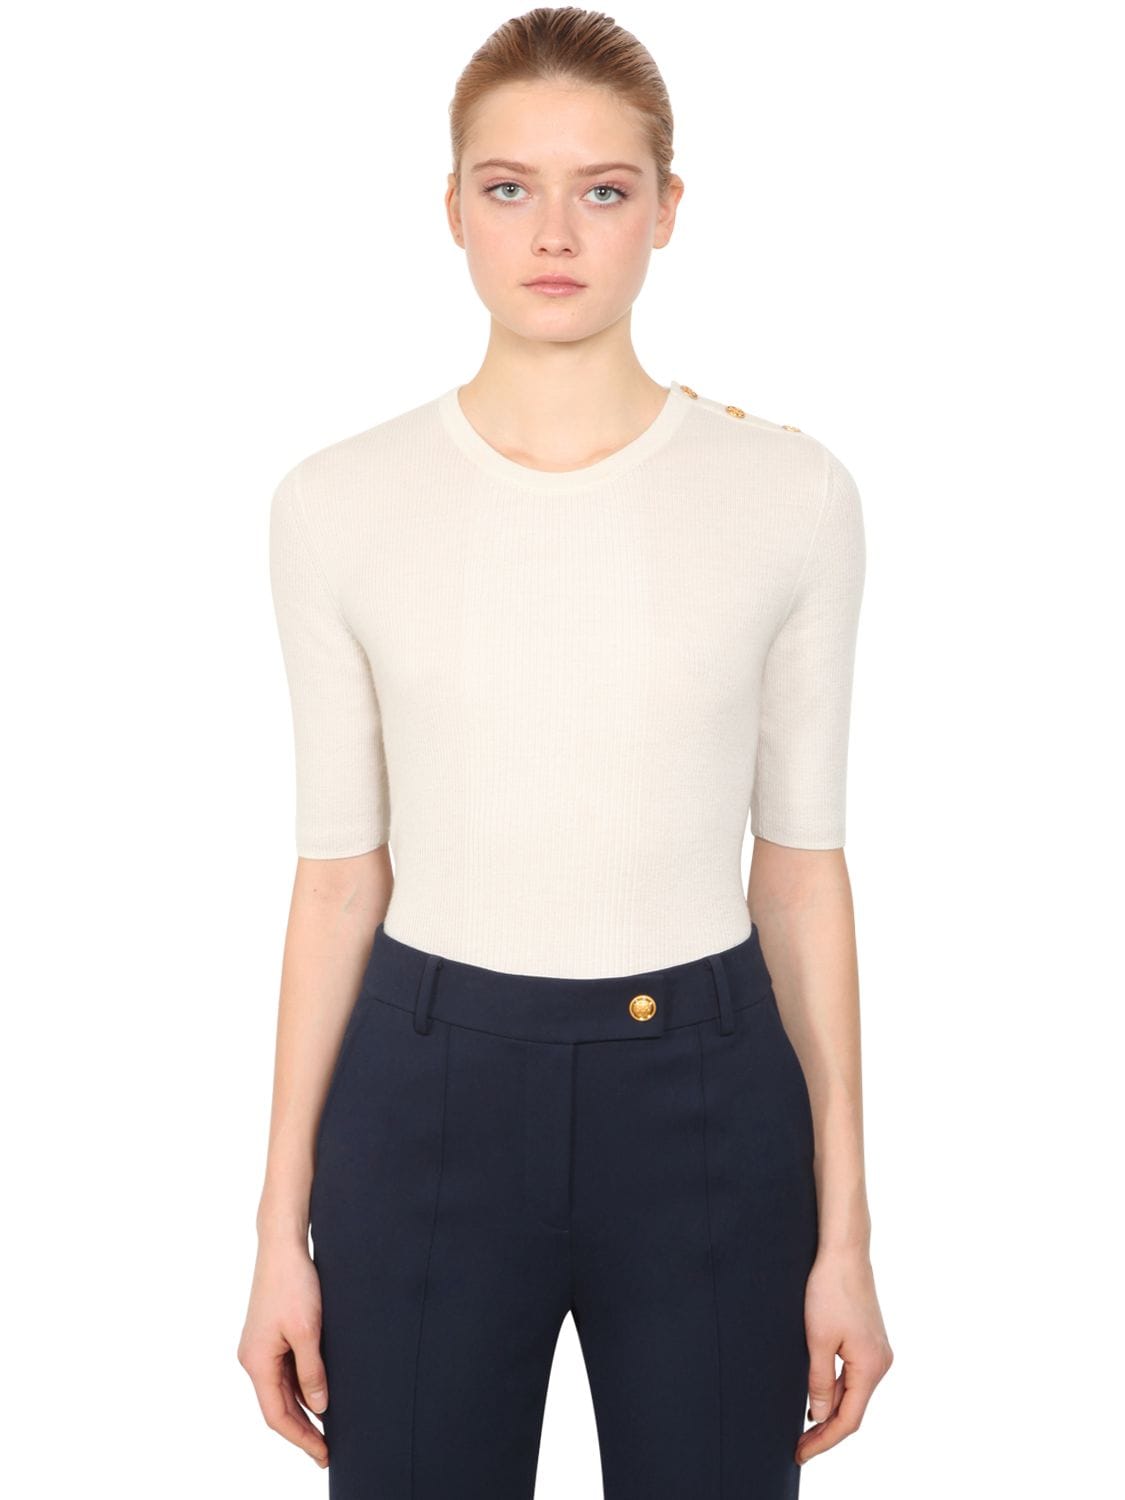 Tory Burch Short Sleeve Cashmere Knit Sweater In Ivory